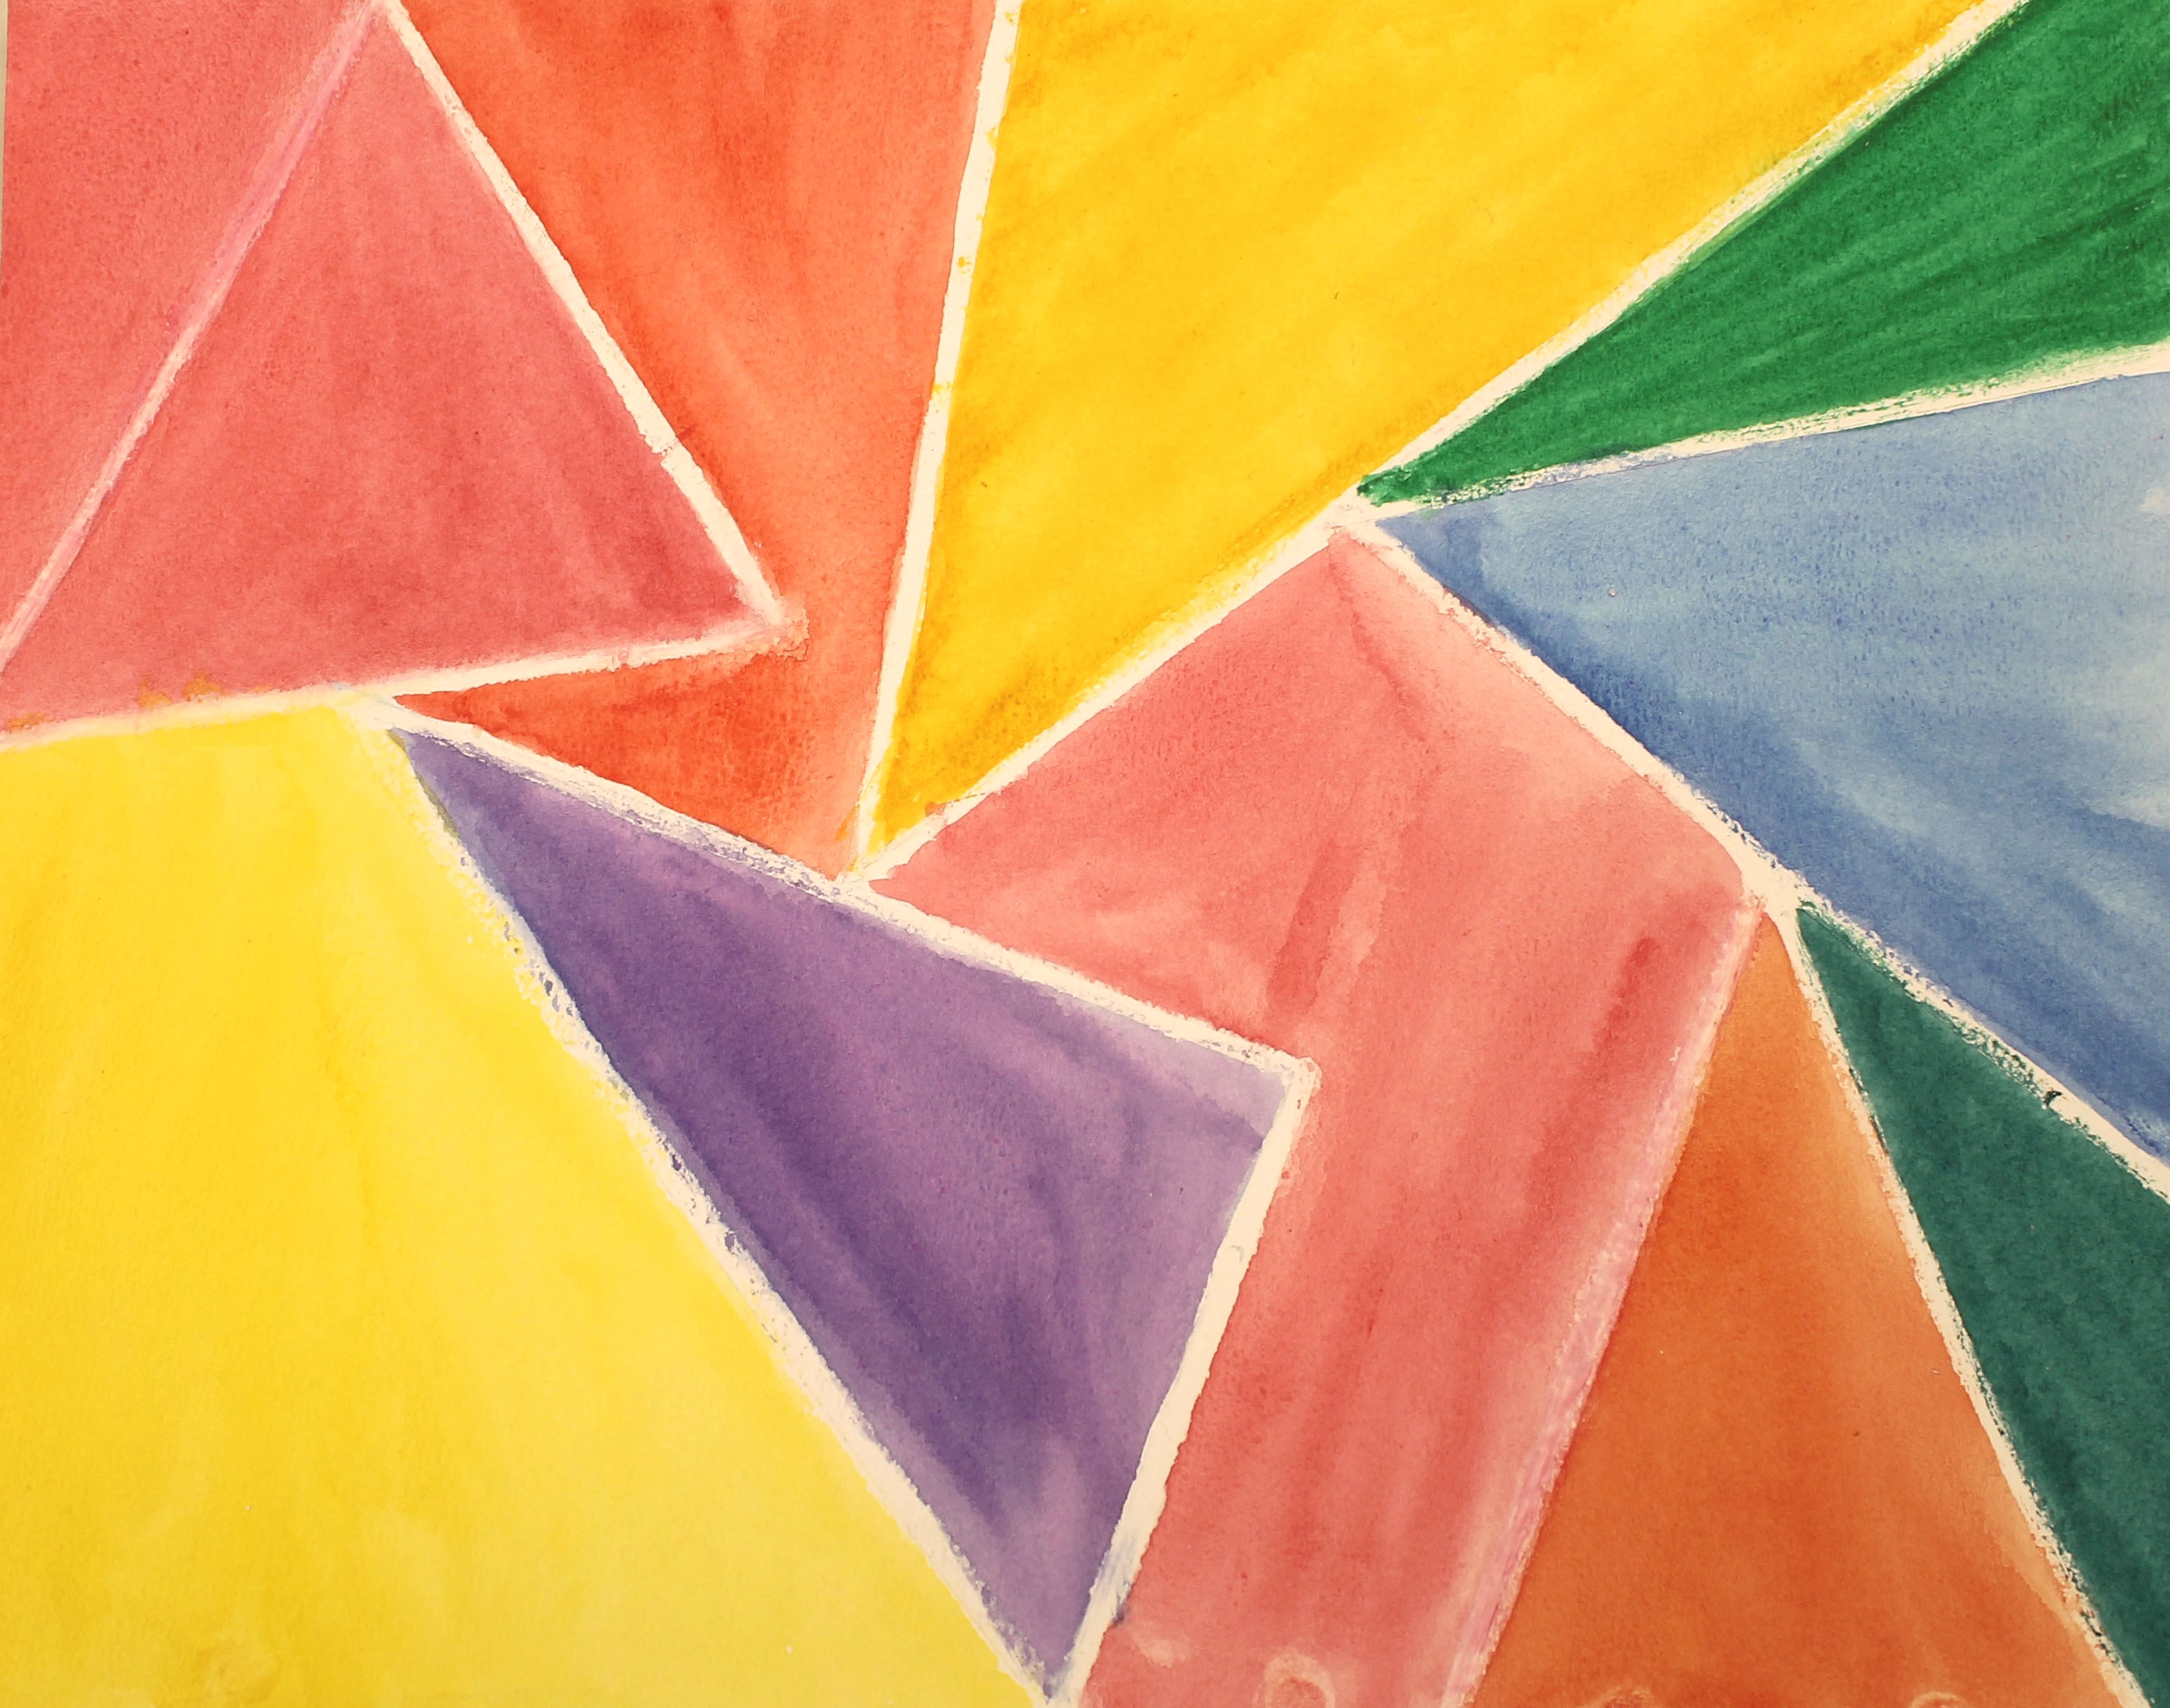 geometric-organic-shapes-featured-art-element-in-fall-2013-art-courses